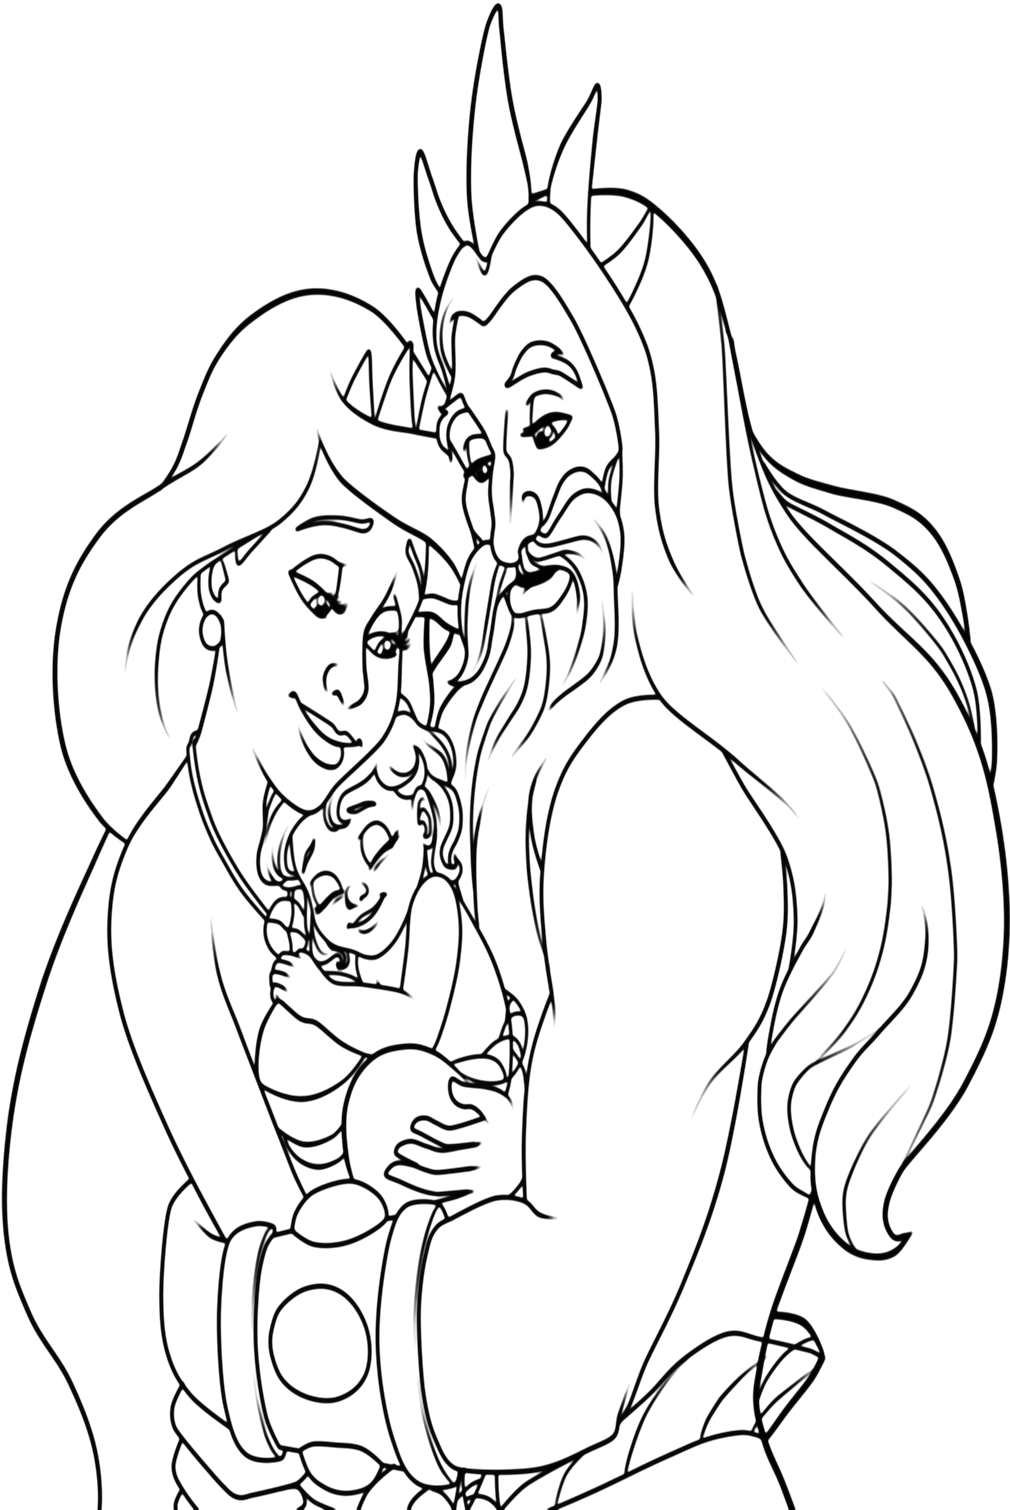 Disney The Little Mermaid 2 Coloring Pages